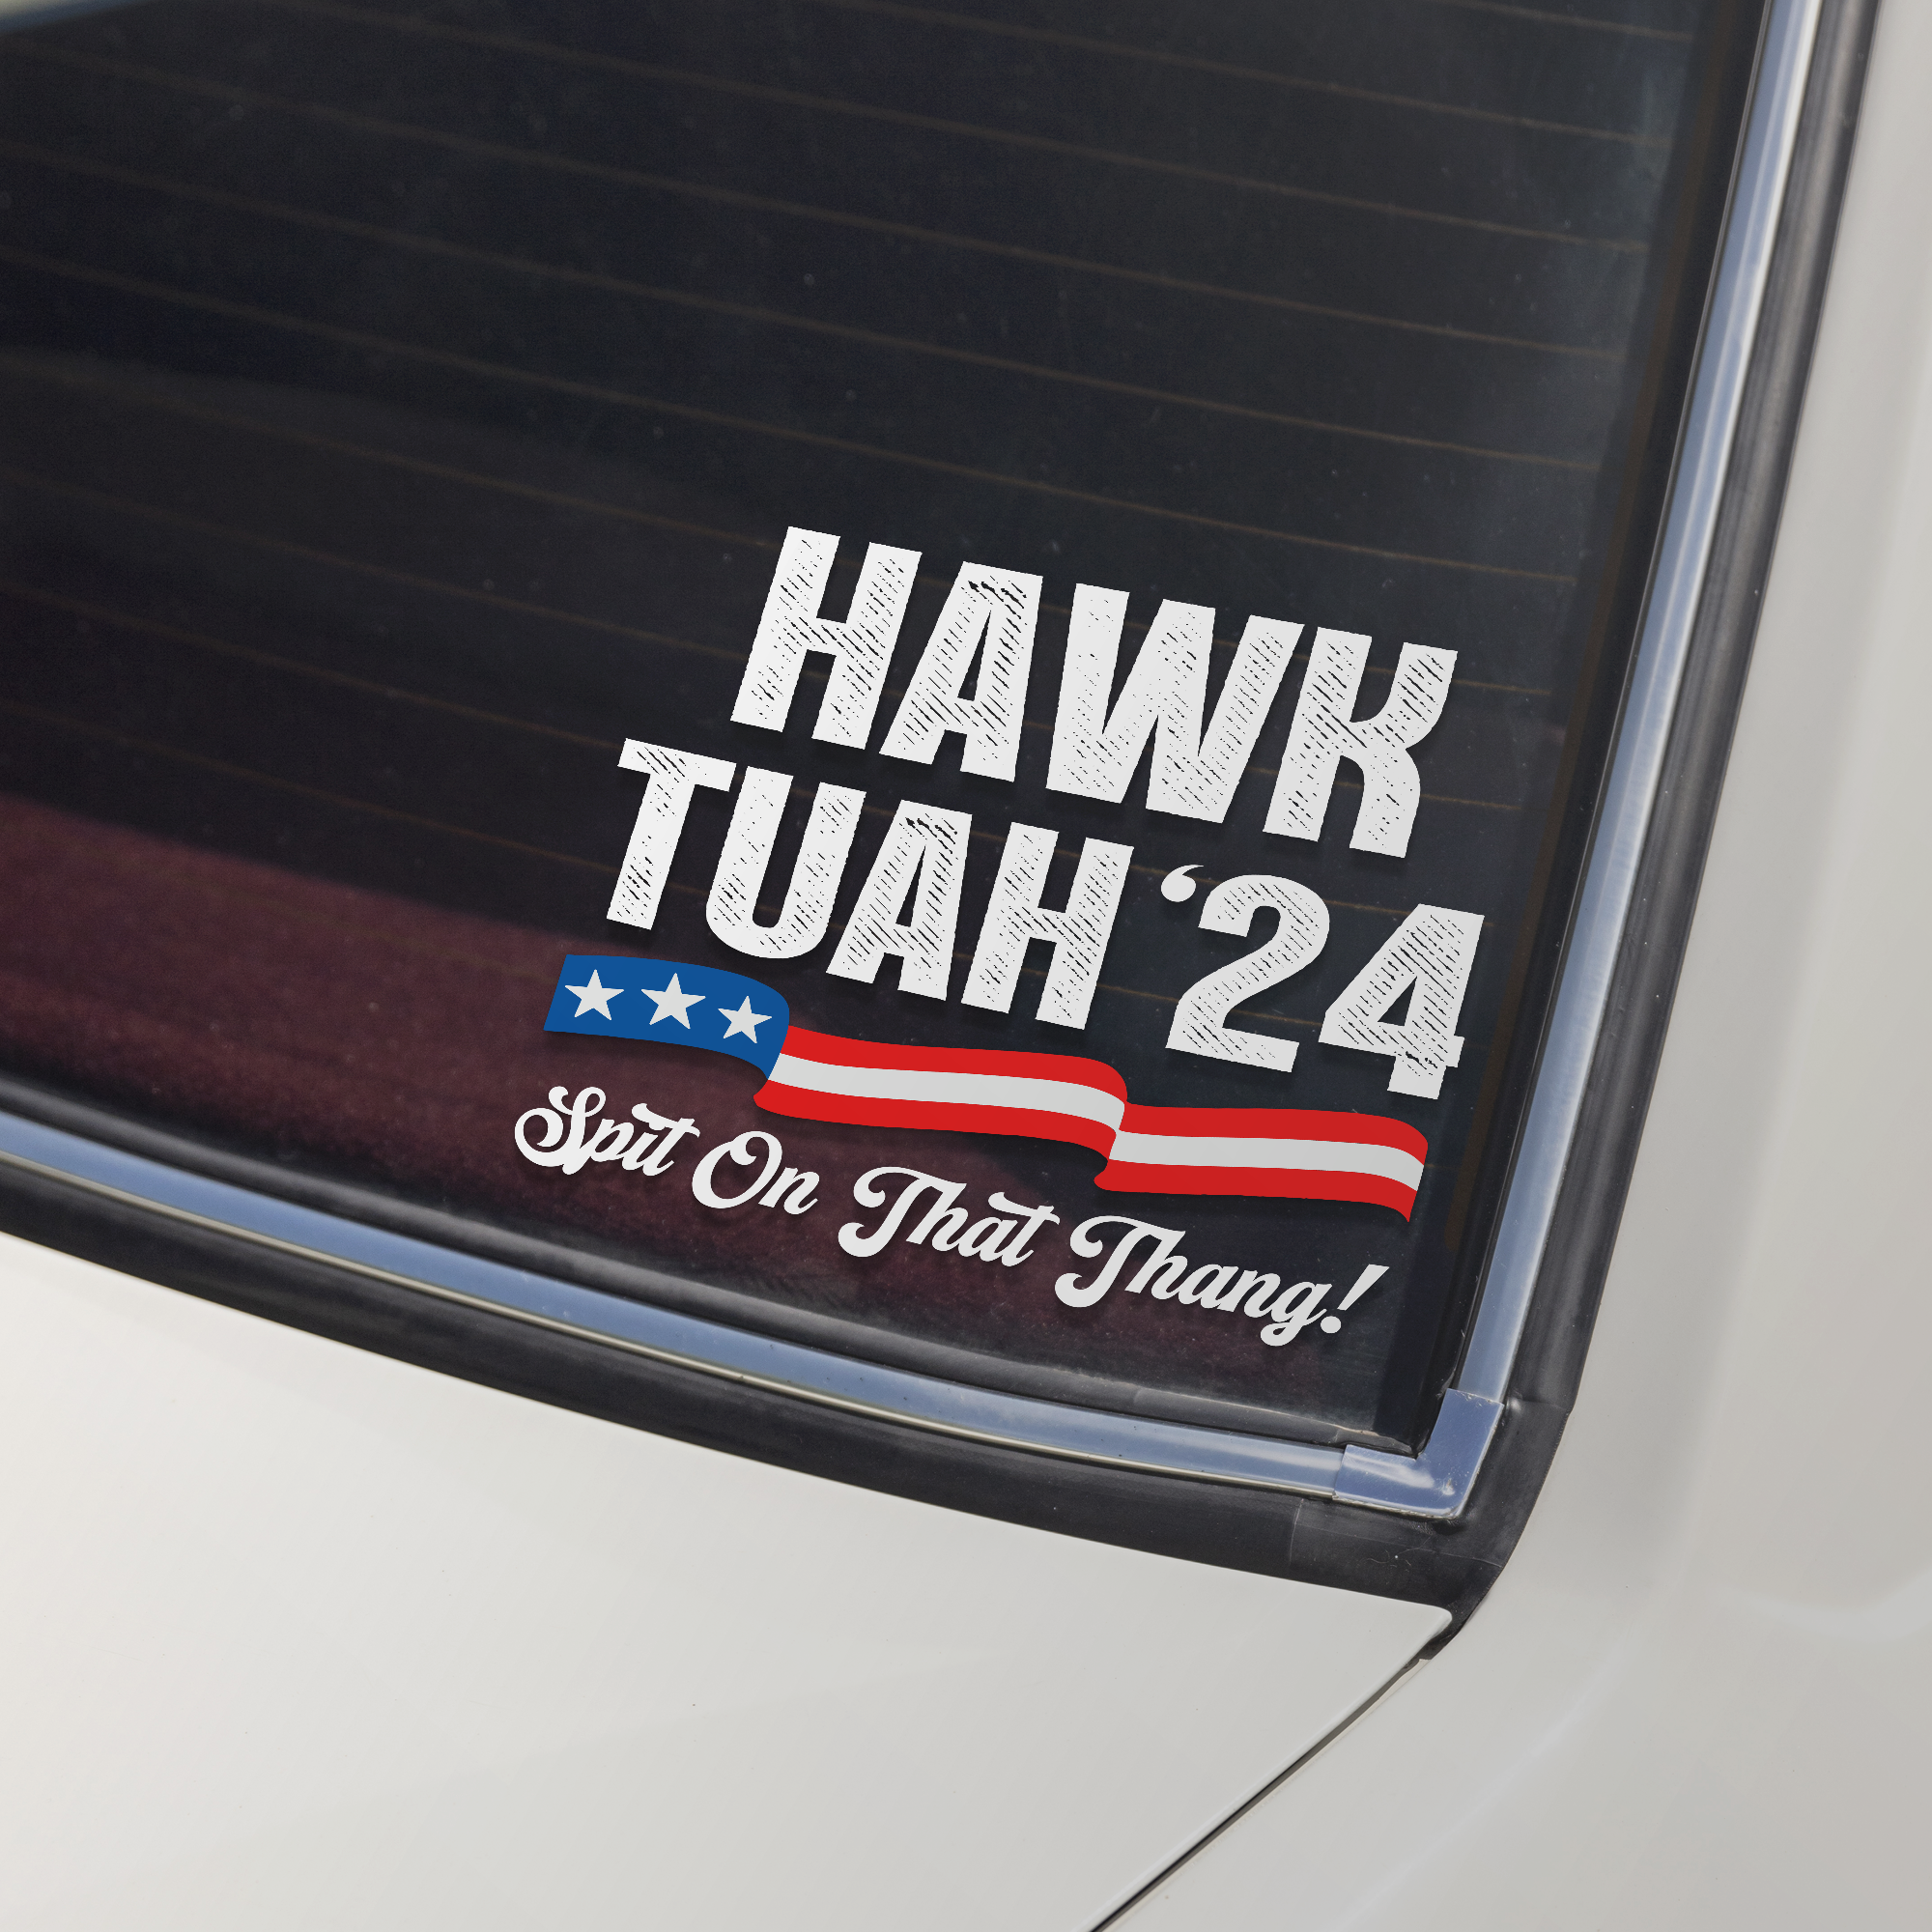 Hawk Tuah 24 Spit On That Thang Decal HA75 62898